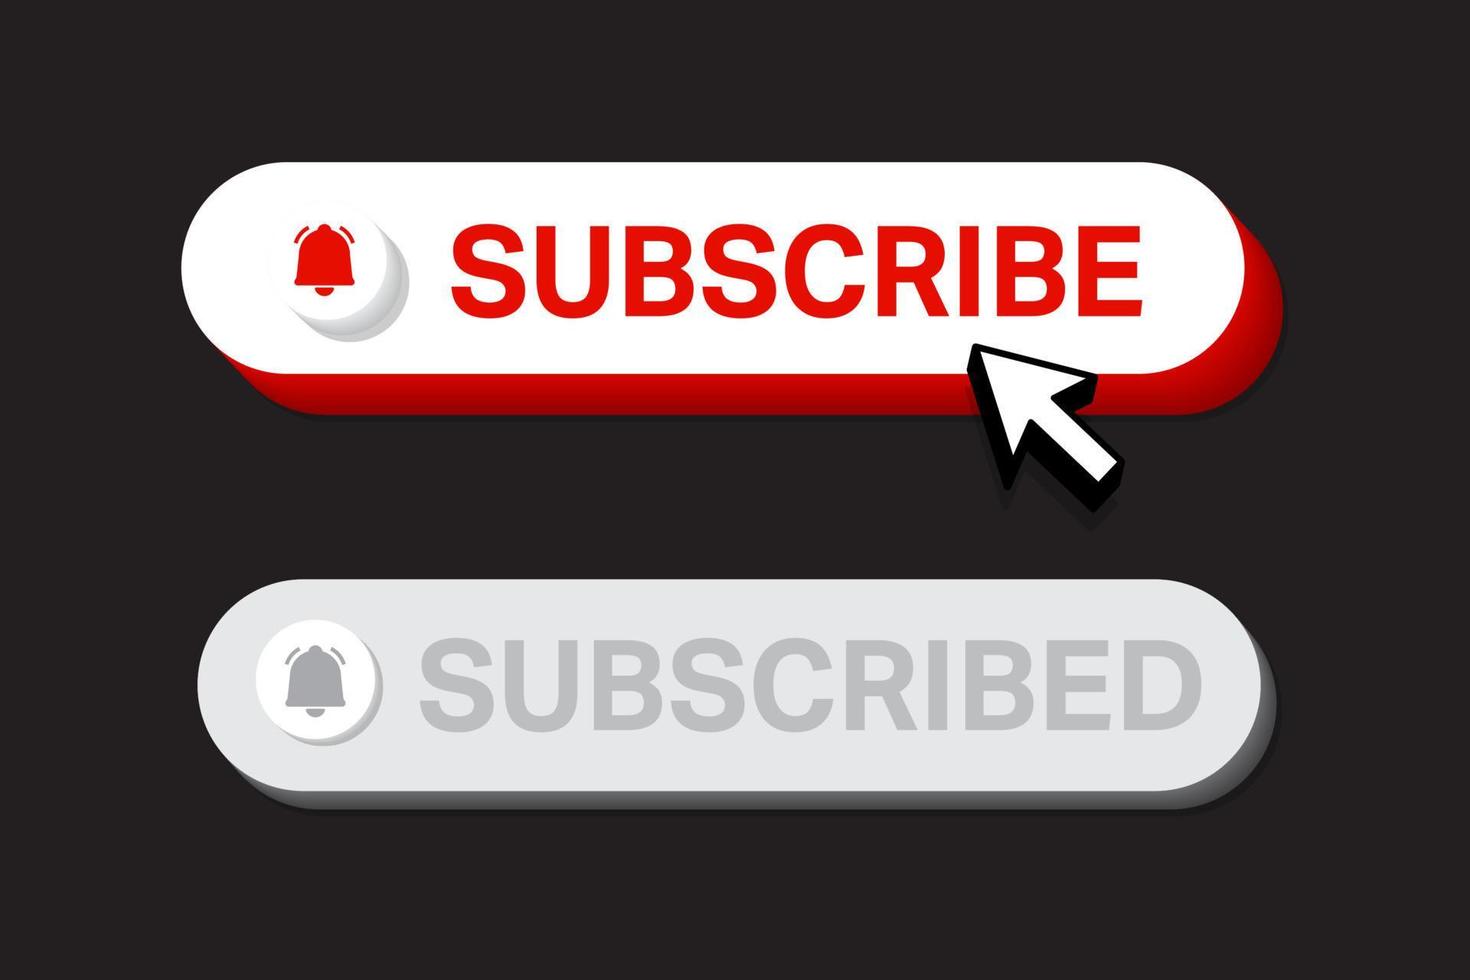 Subscribe, bell button. Red button subscribe to channel, blog. Social media button graphic interface. Marketing. Vector illustration.